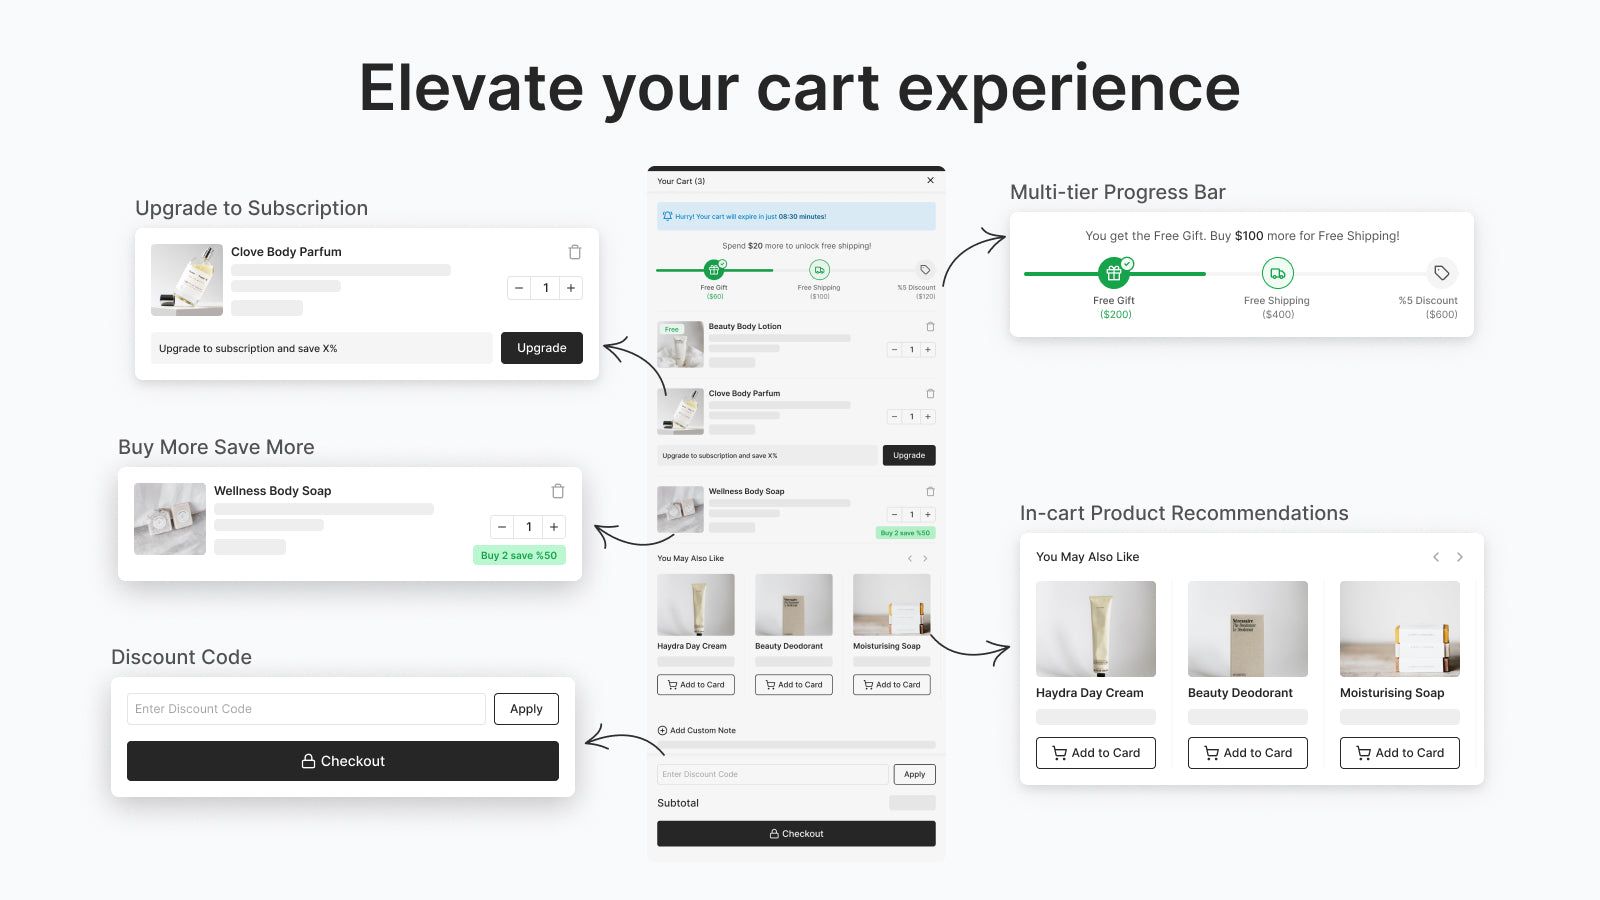 Elevate your cart experience